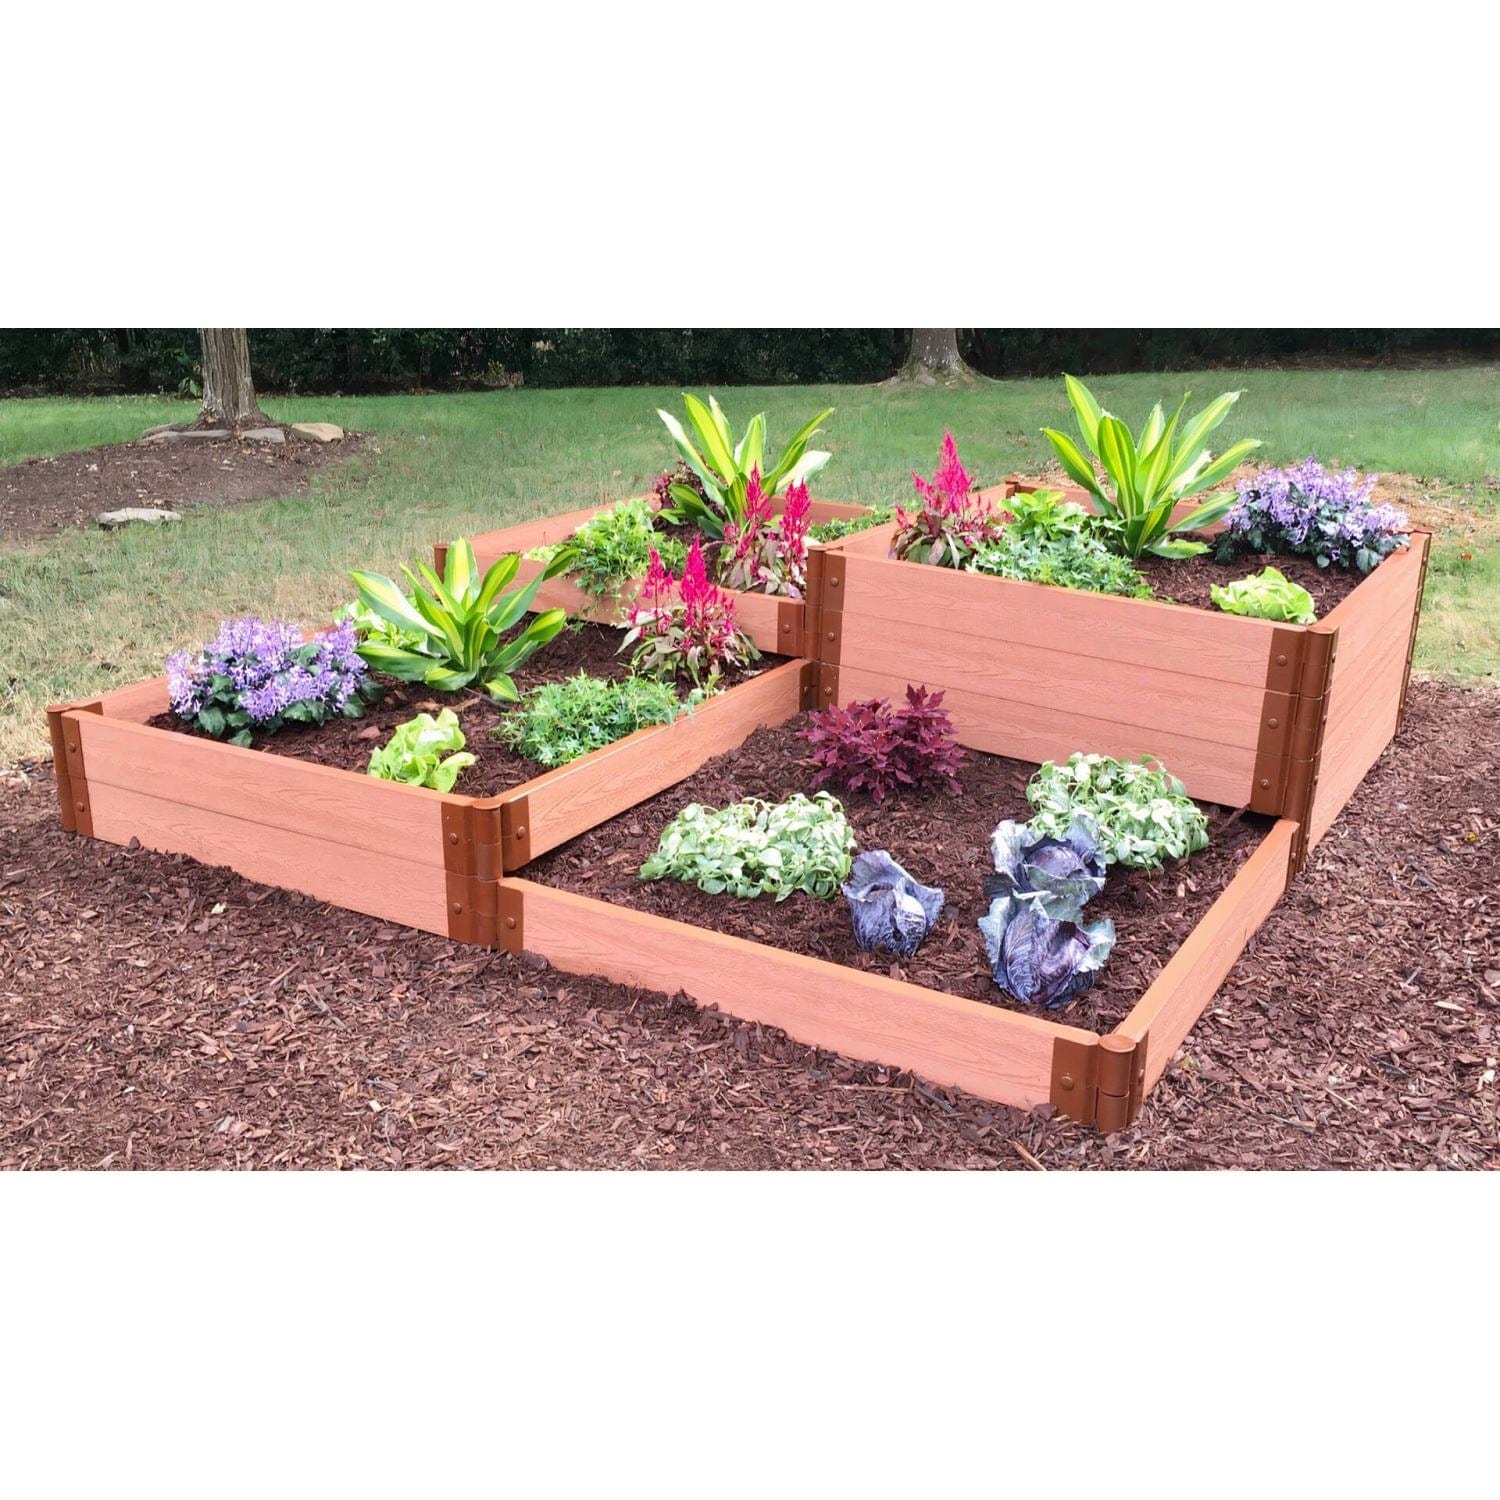 Frame It All Gardening Accessories Frame It All | Tool-Free Terraced Square Raised Garden Bed (4-Tier Terrace) 8' X 8' X 22" Weathered Wood - 1" Profile 800001097